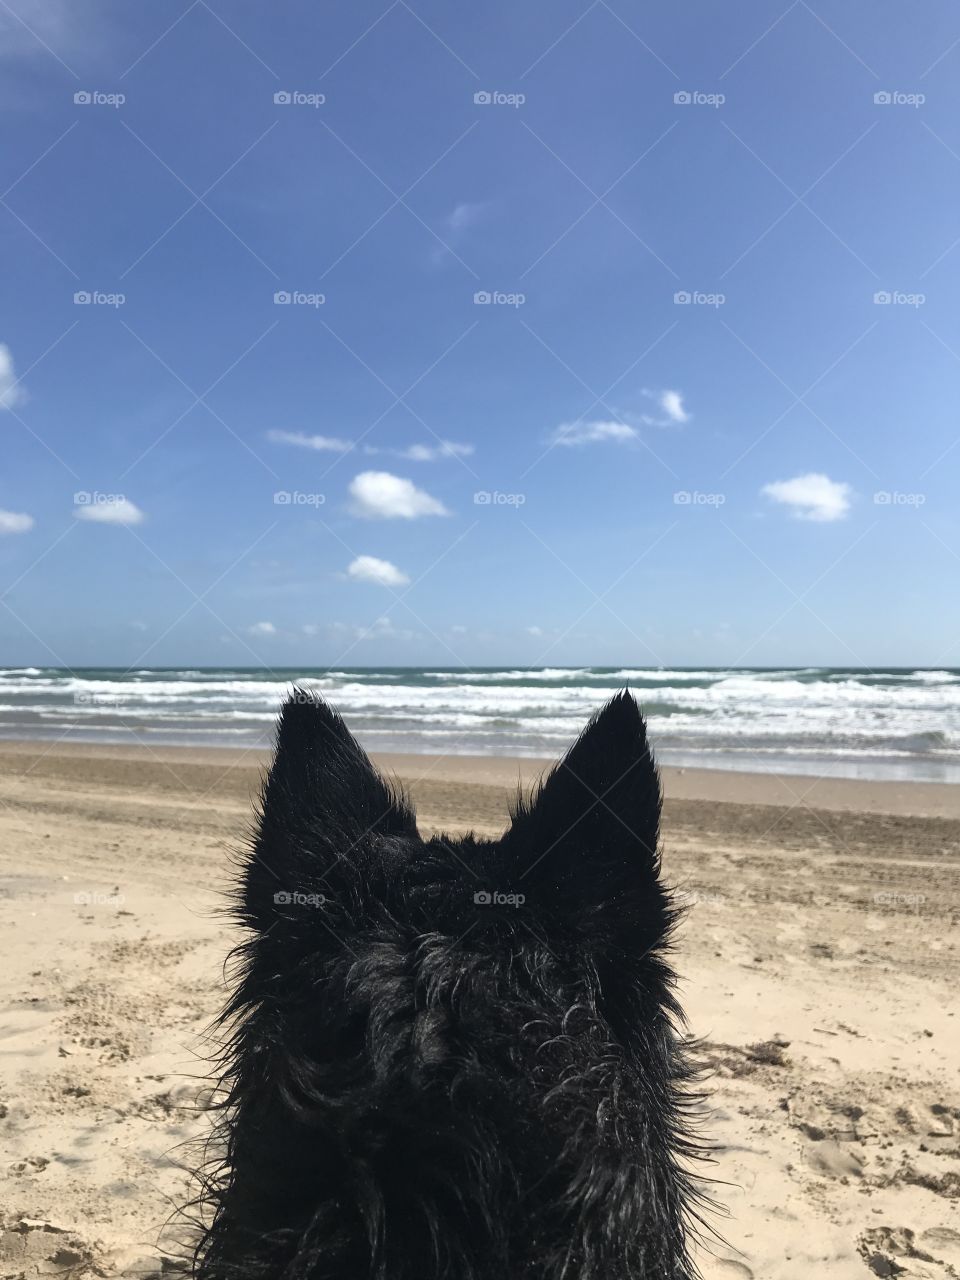 Even when it’s fall in Texas, it’s a good day for a beach trip with your best bud.